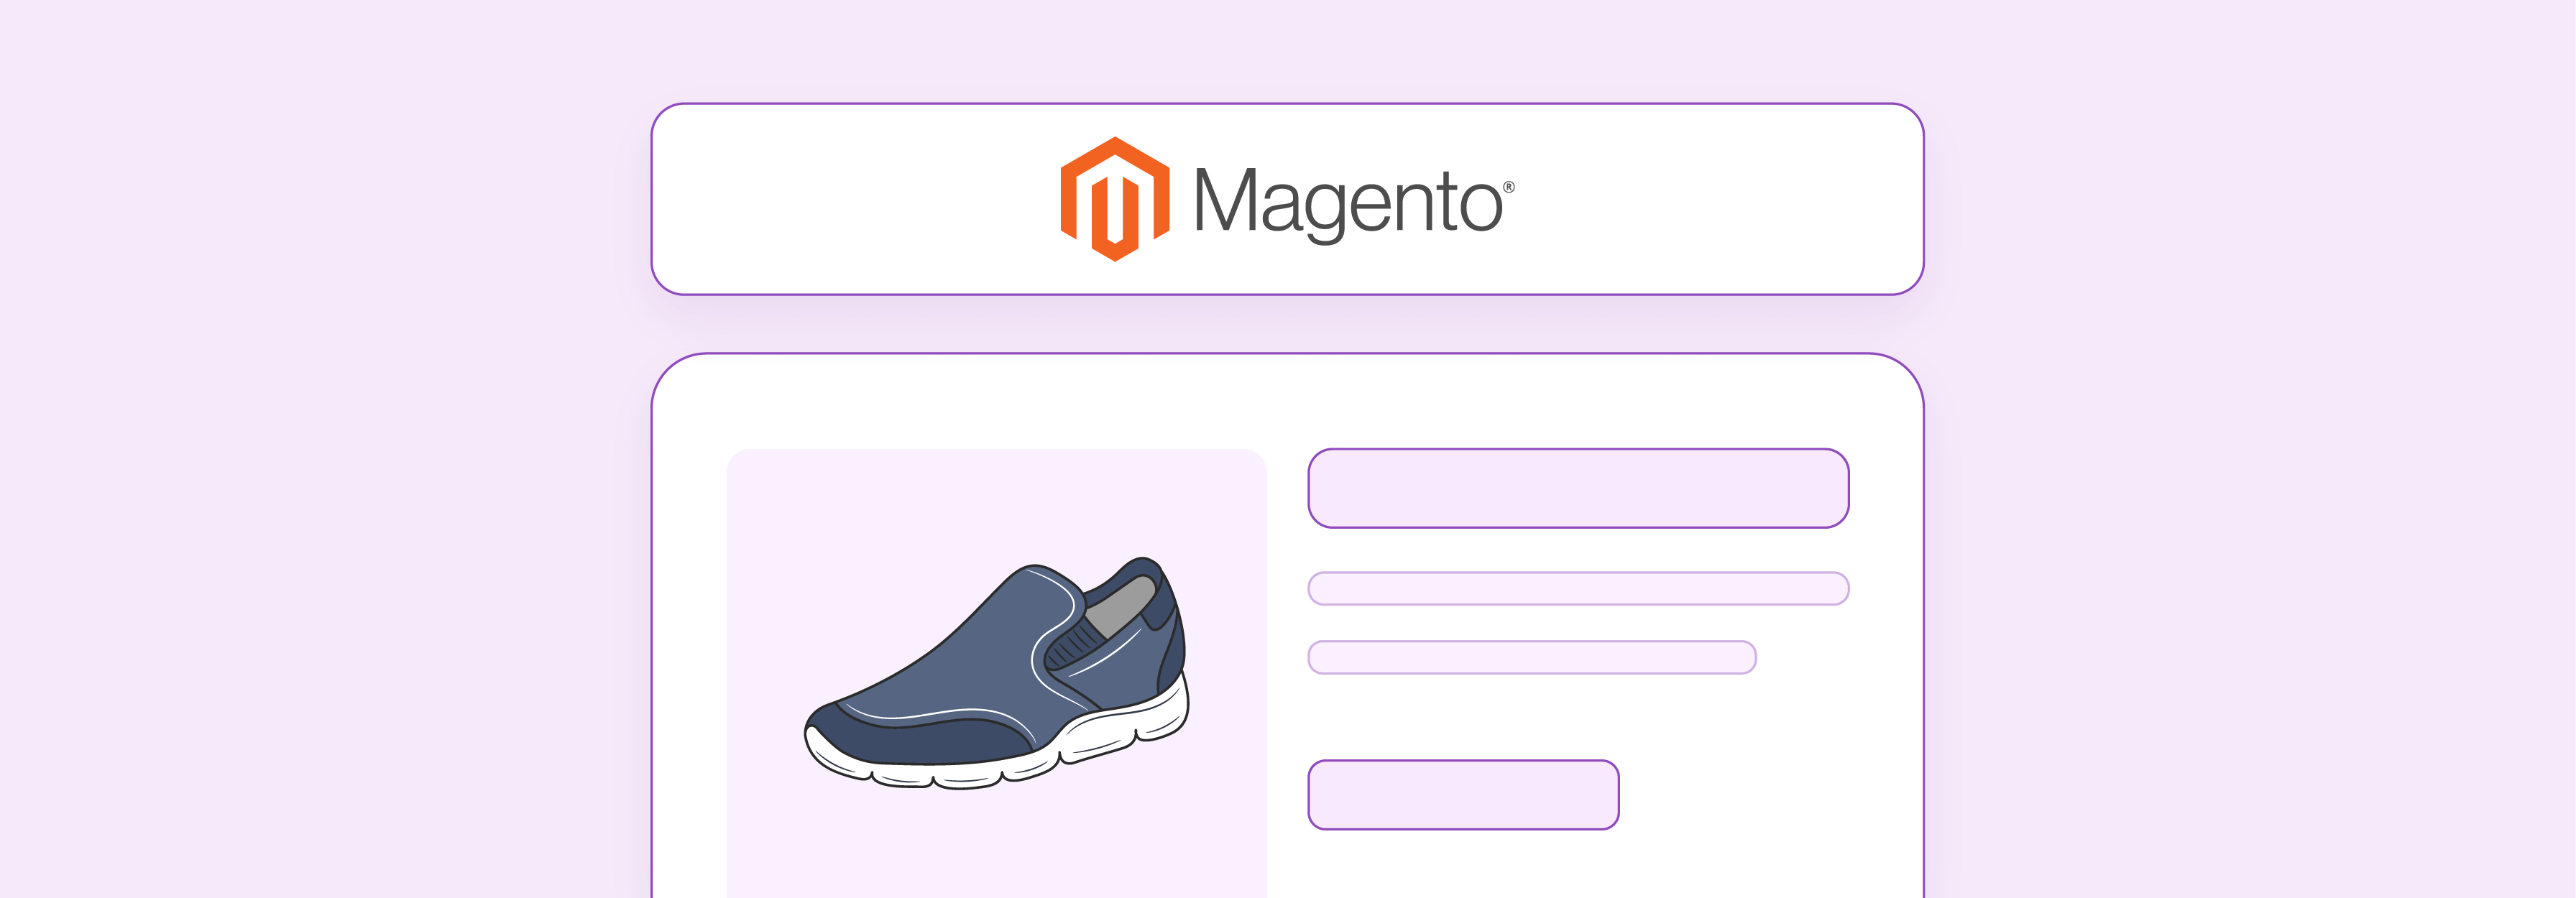 Explaining Magento Web Hosting and its Specialized Services for Online Stores